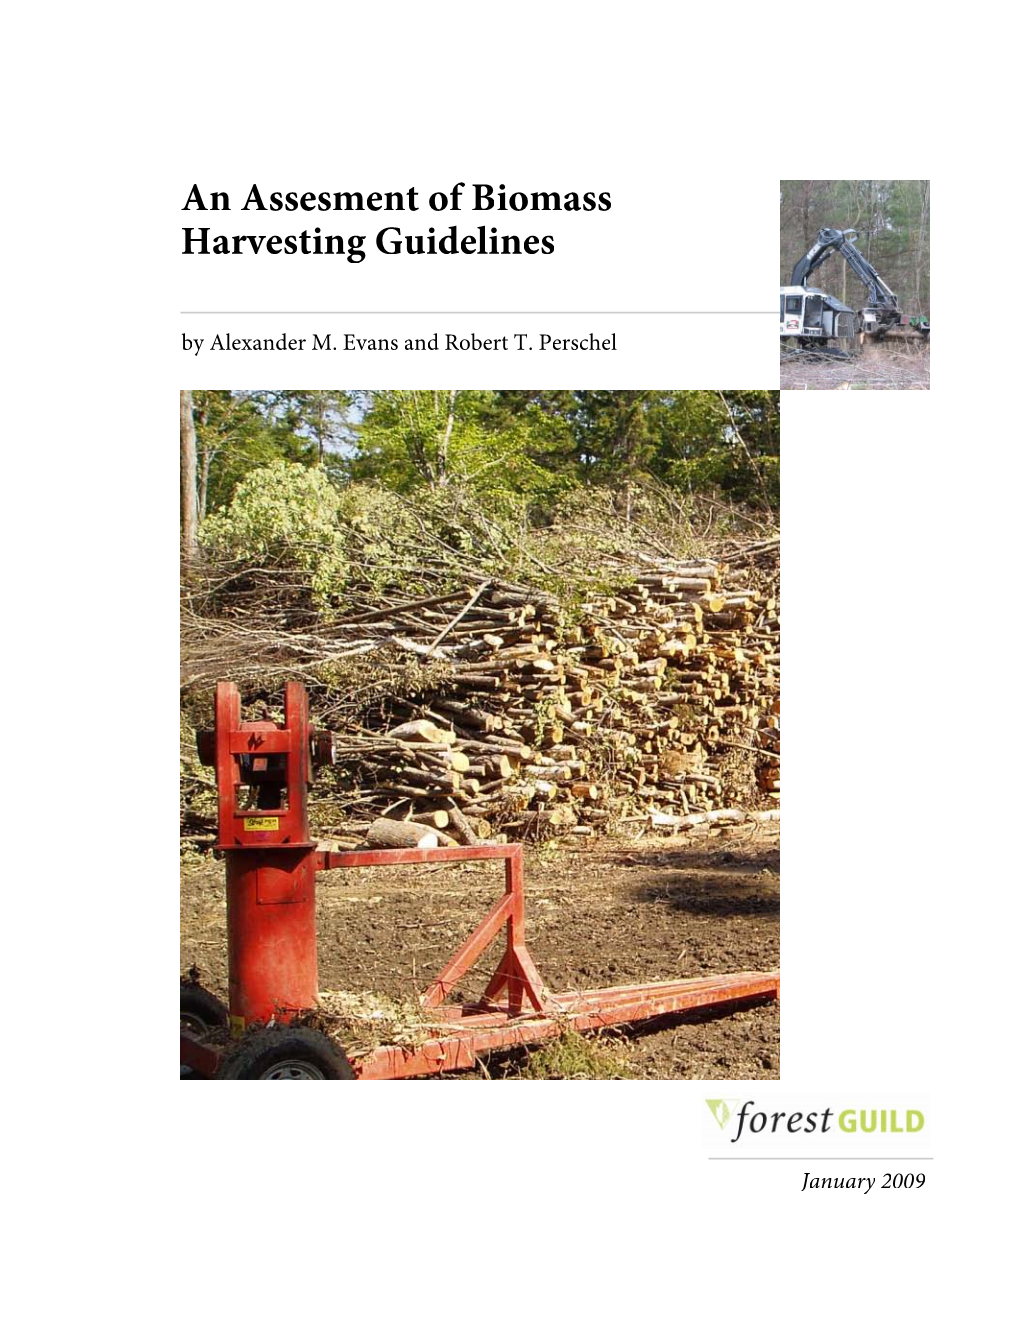 An Assessment of Biomass Harvesting Guidelines